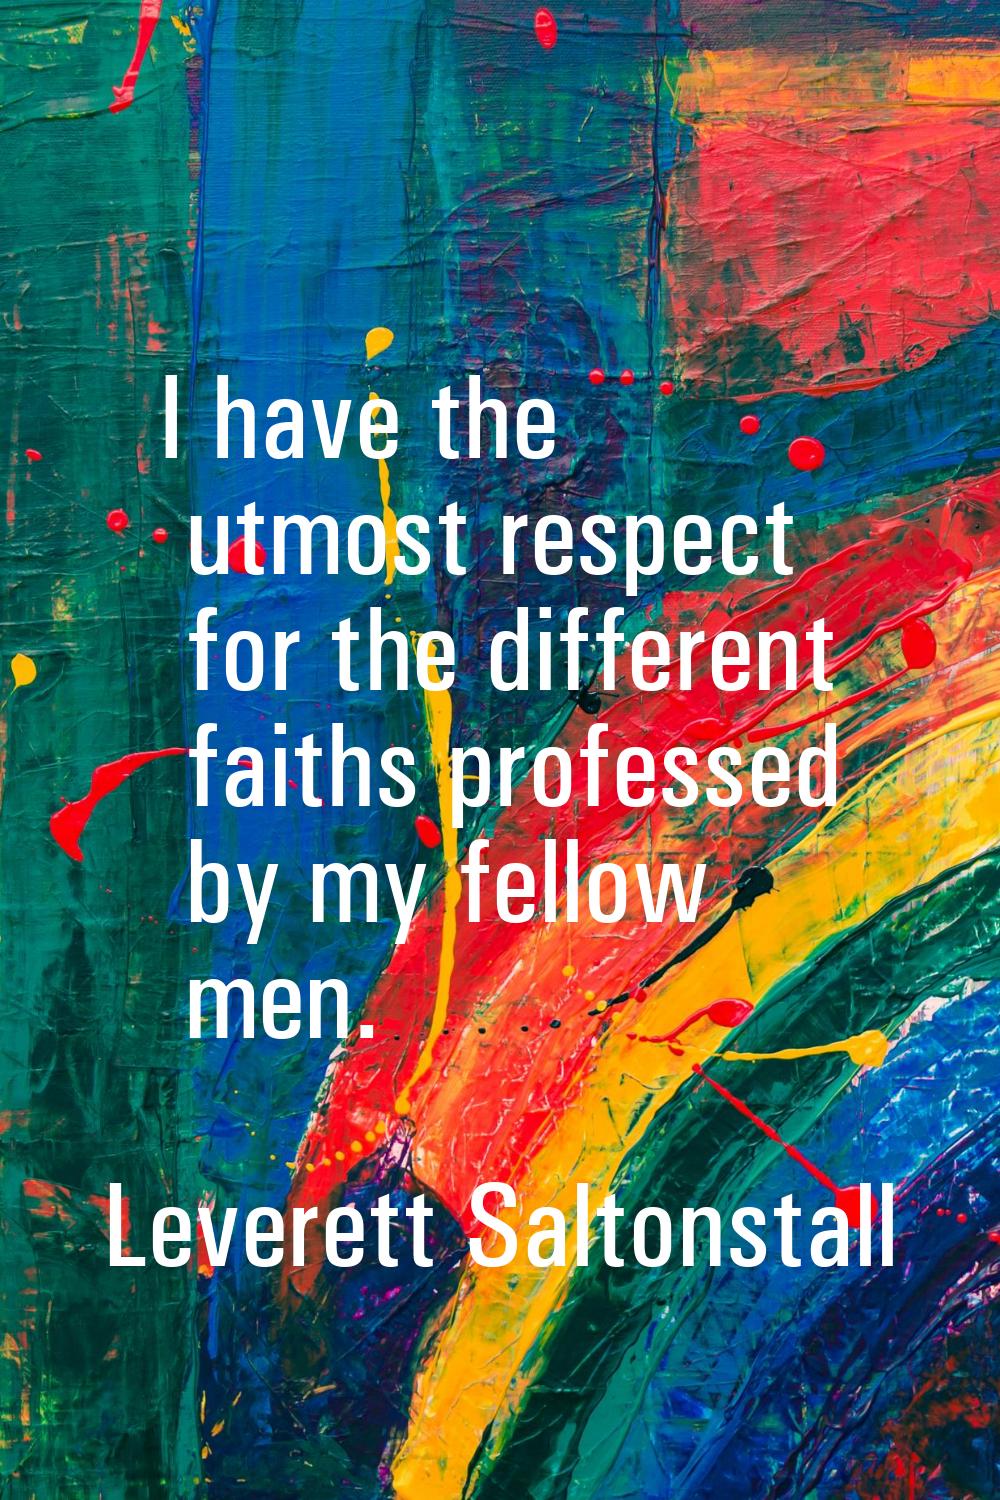 I have the utmost respect for the different faiths professed by my fellow men.